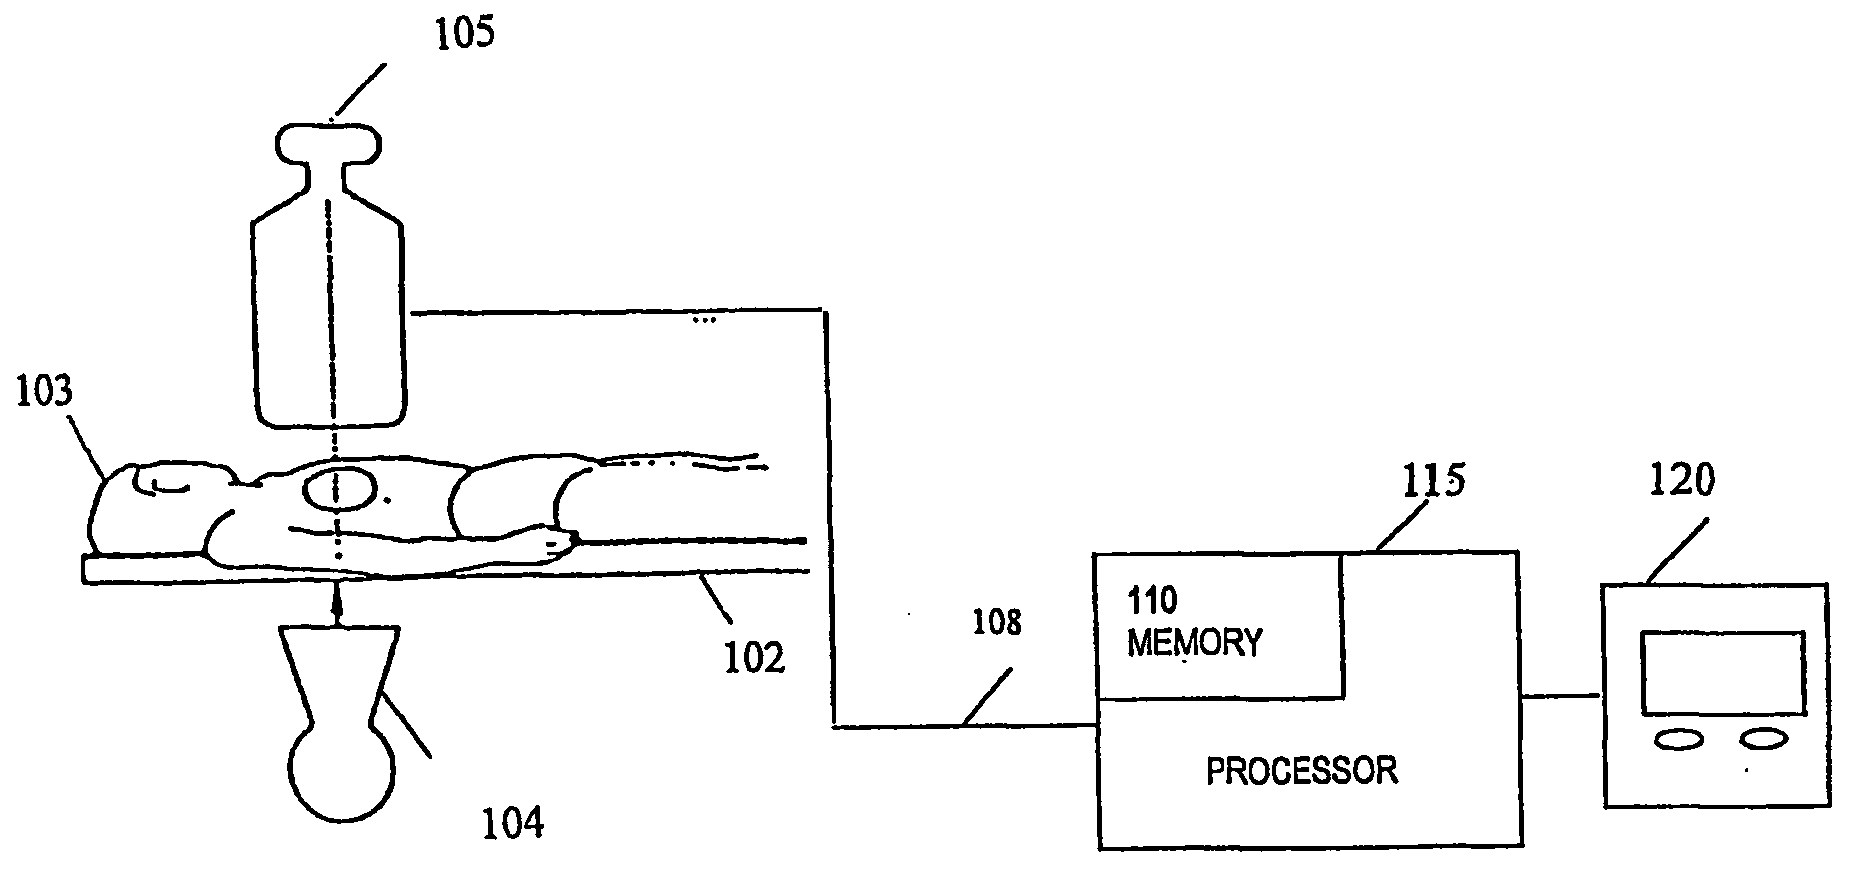 Method and system for positioning a device in a tubular organ